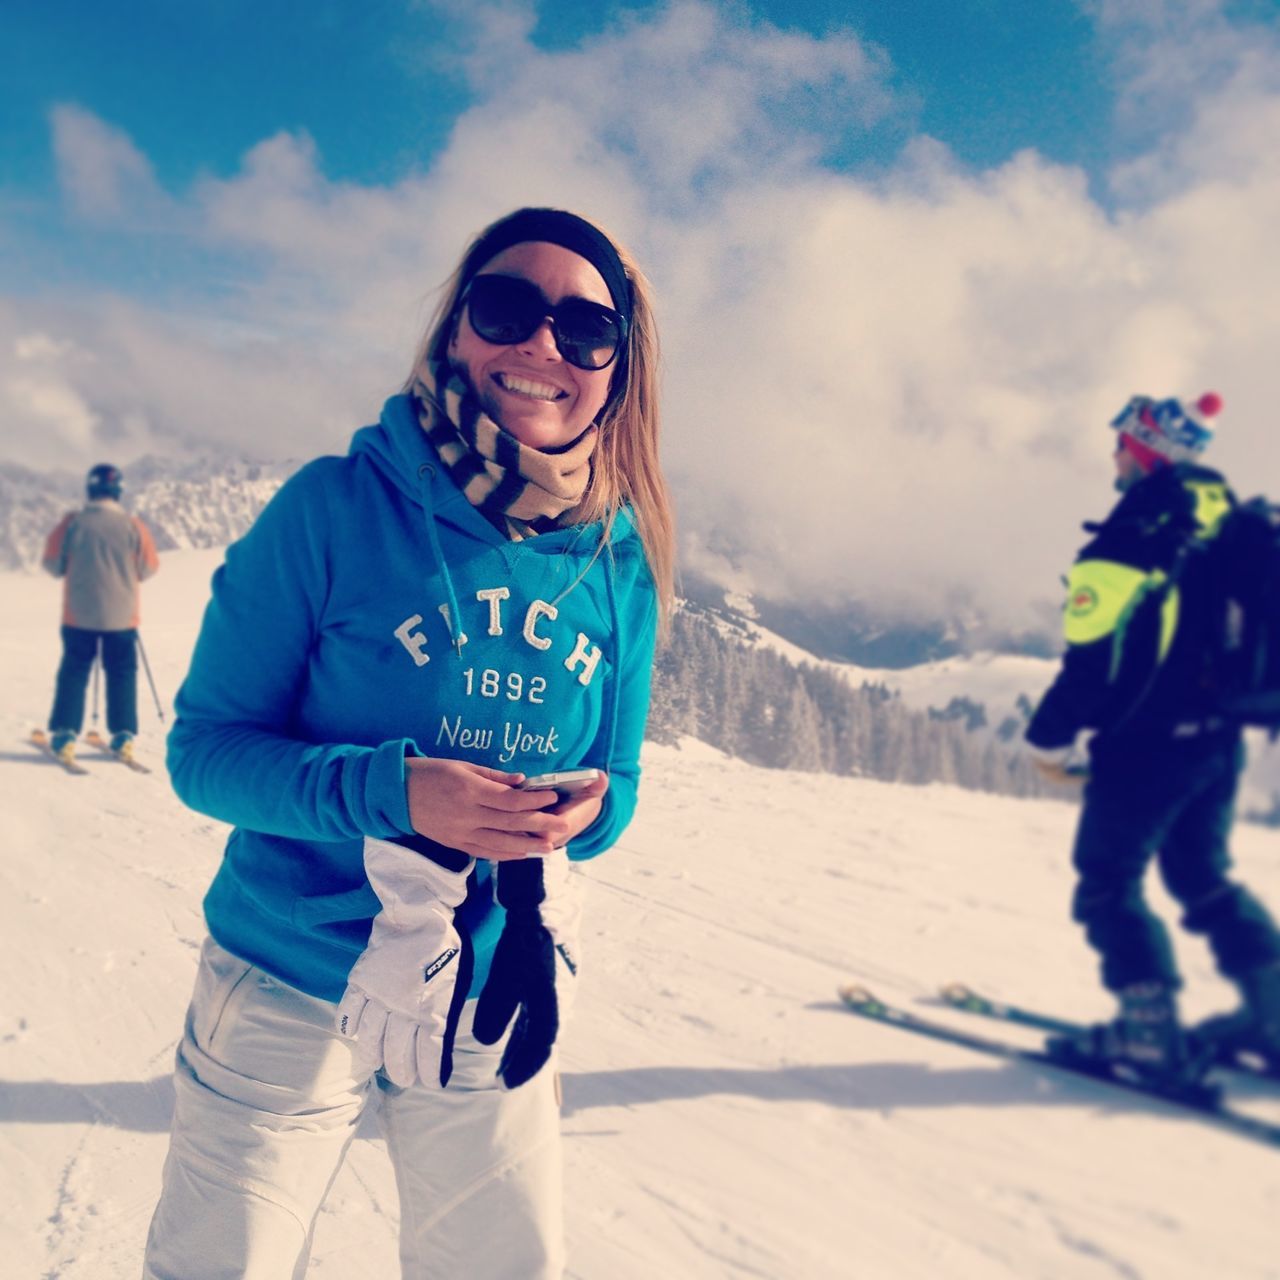 leisure activity, lifestyles, snow, winter, cold temperature, person, casual clothing, full length, sky, looking at camera, front view, warm clothing, vacations, portrait, mountain, happiness, smiling, sunlight